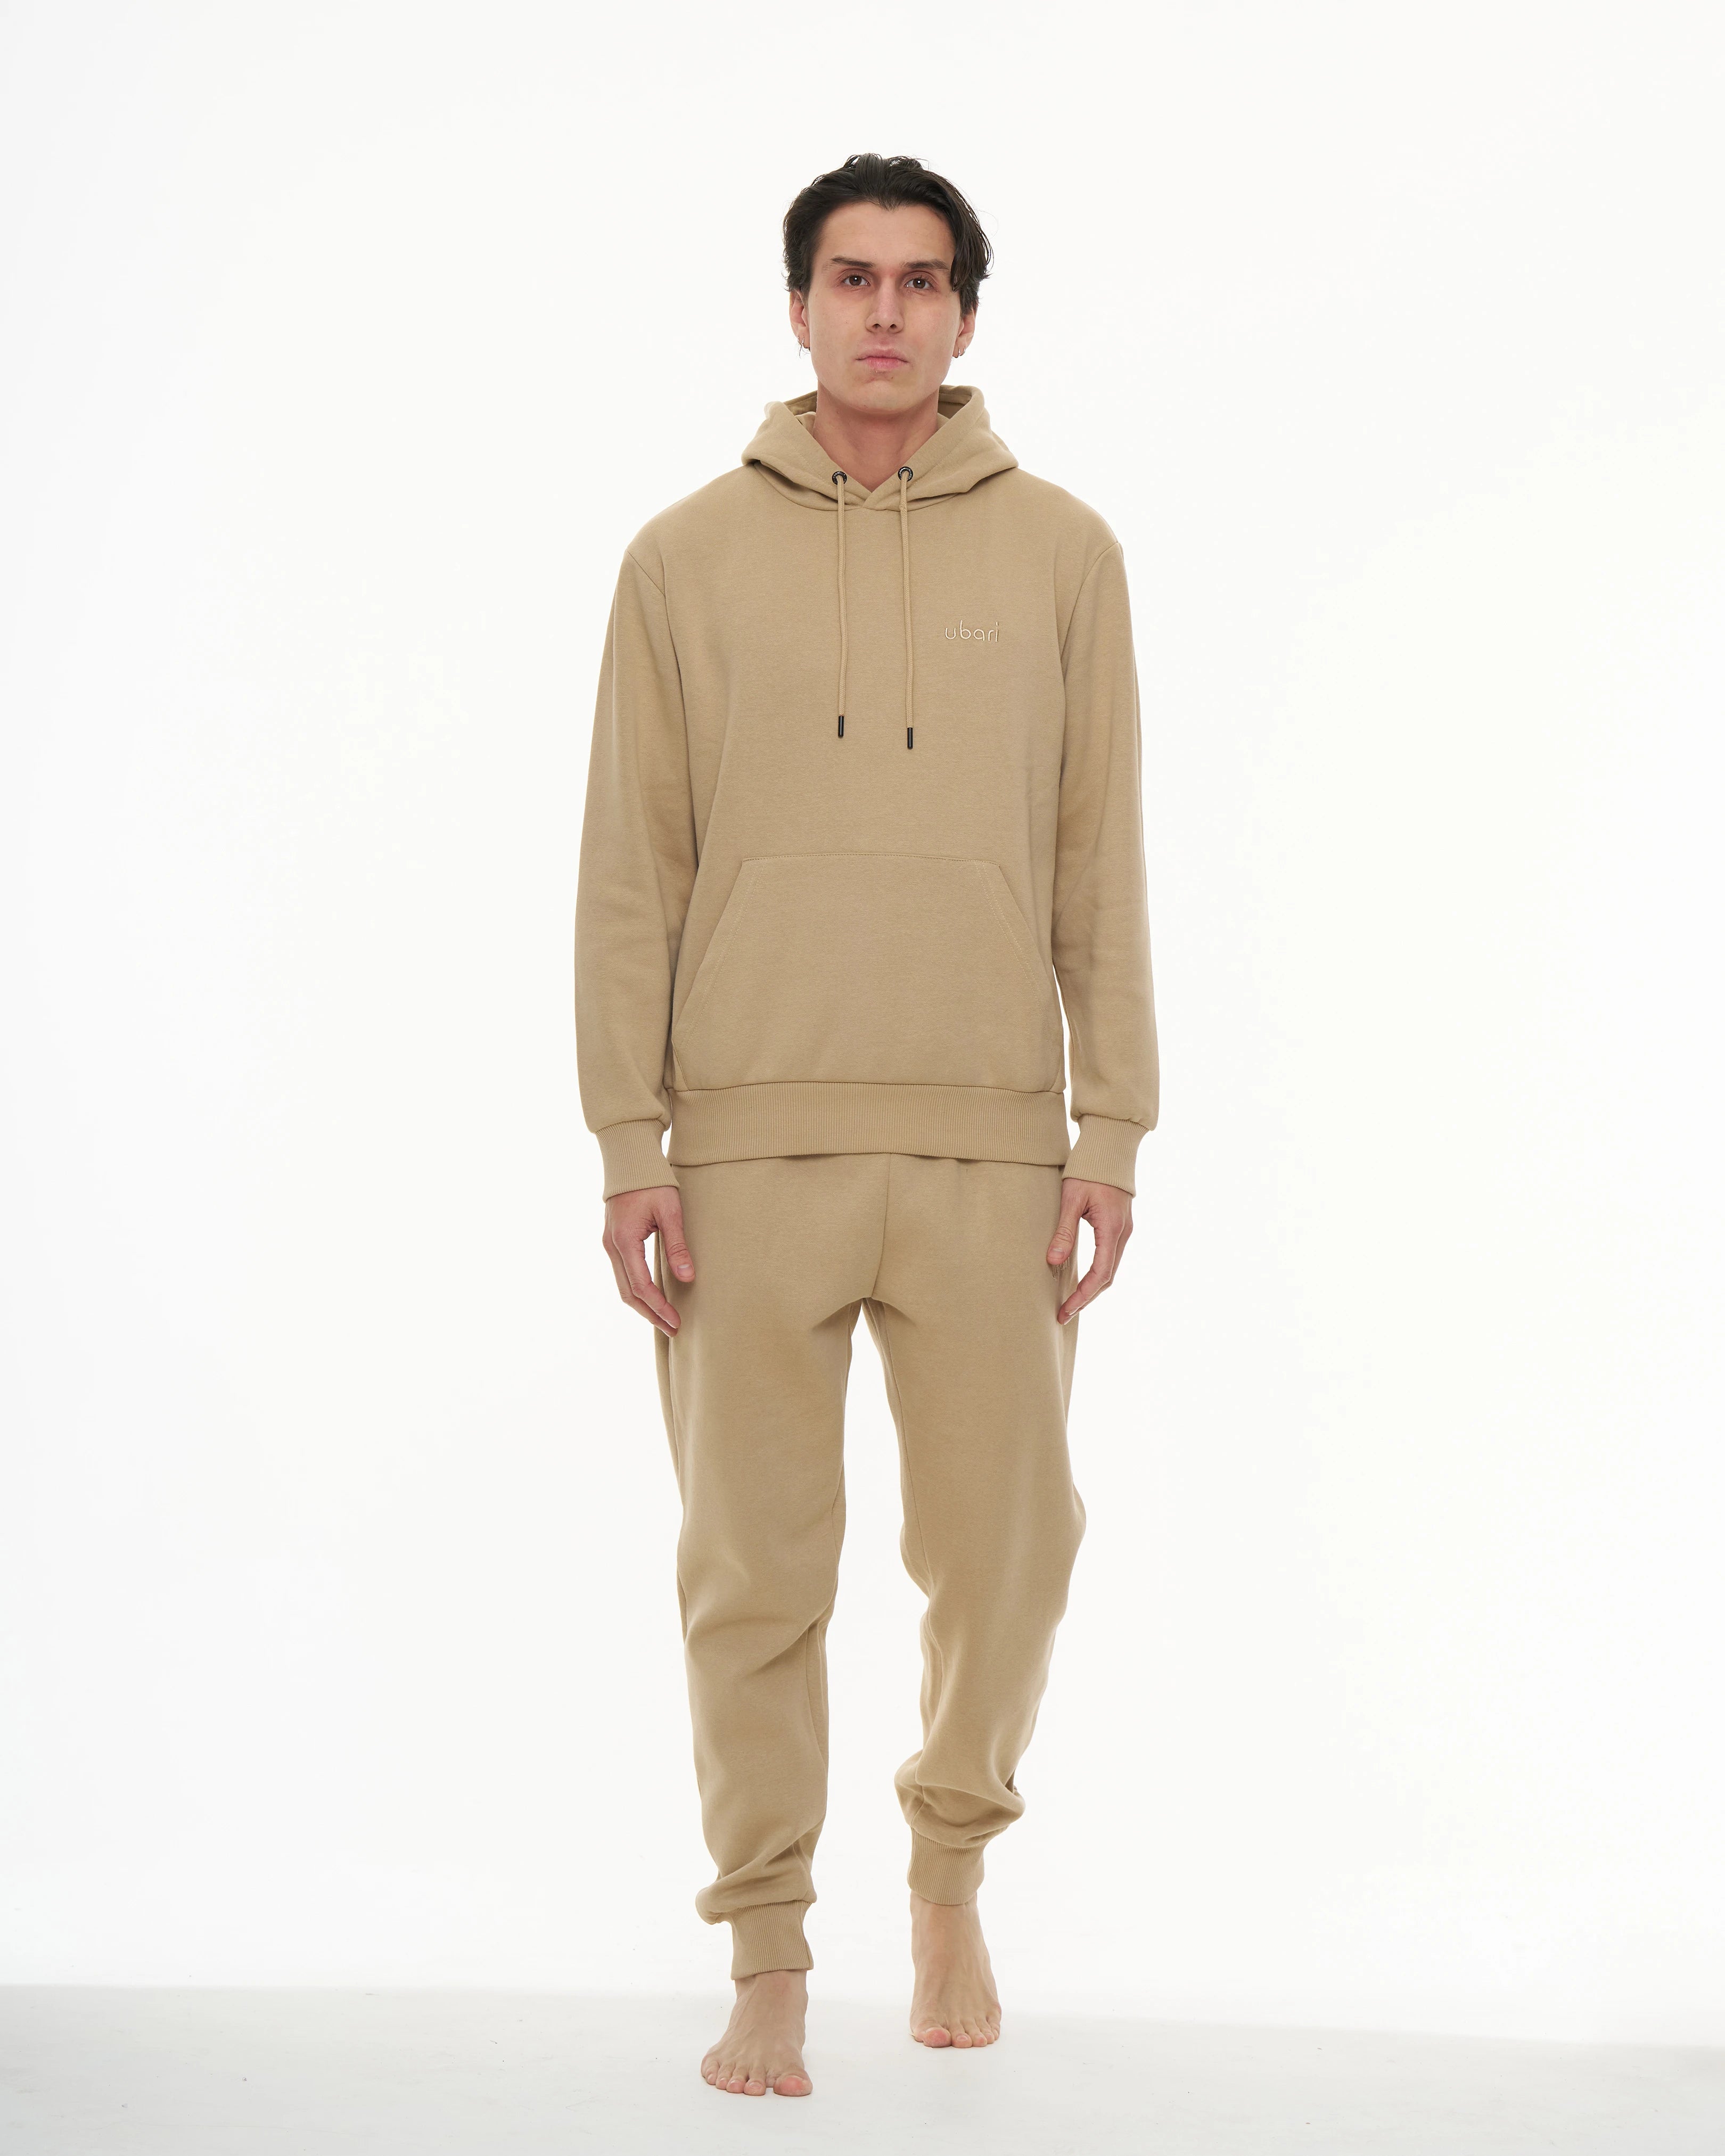 CLASSIC HOODIE & JOGGER SET IN SAND